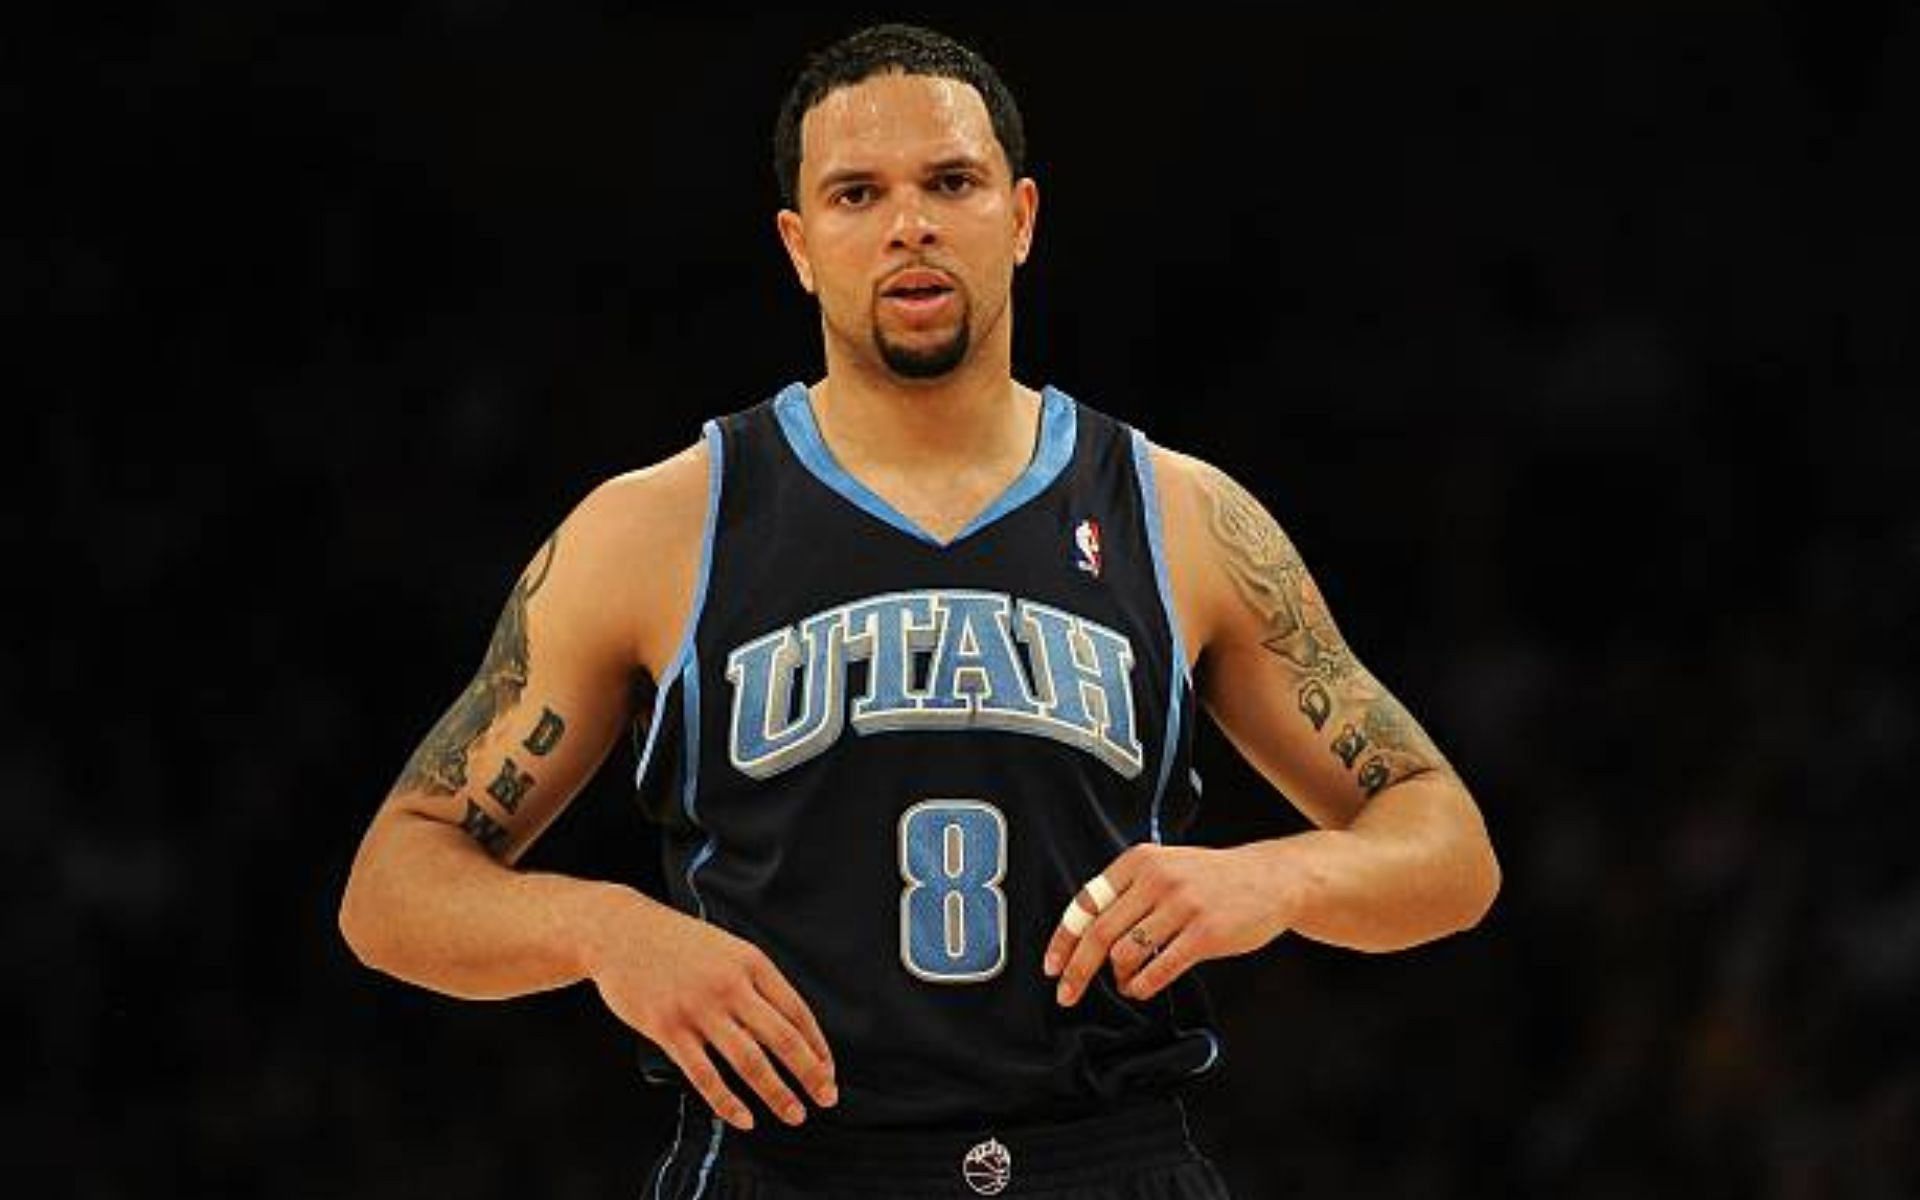 Not in Hall of Fame - 62. Deron Williams